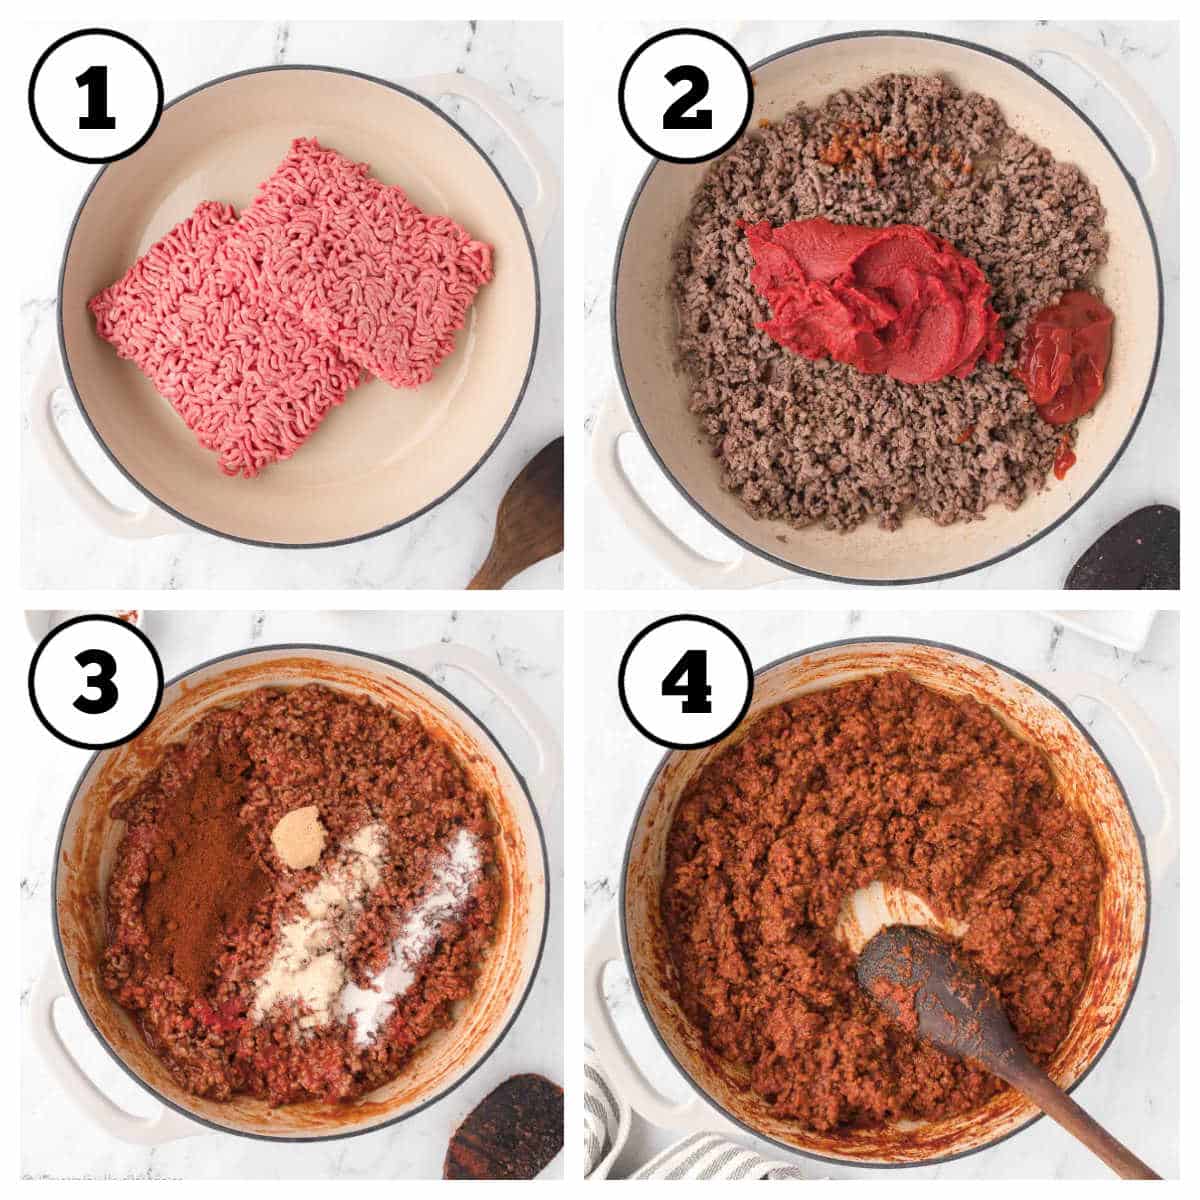 Steps 1-4 of image collage of how to make hot dog sauce.